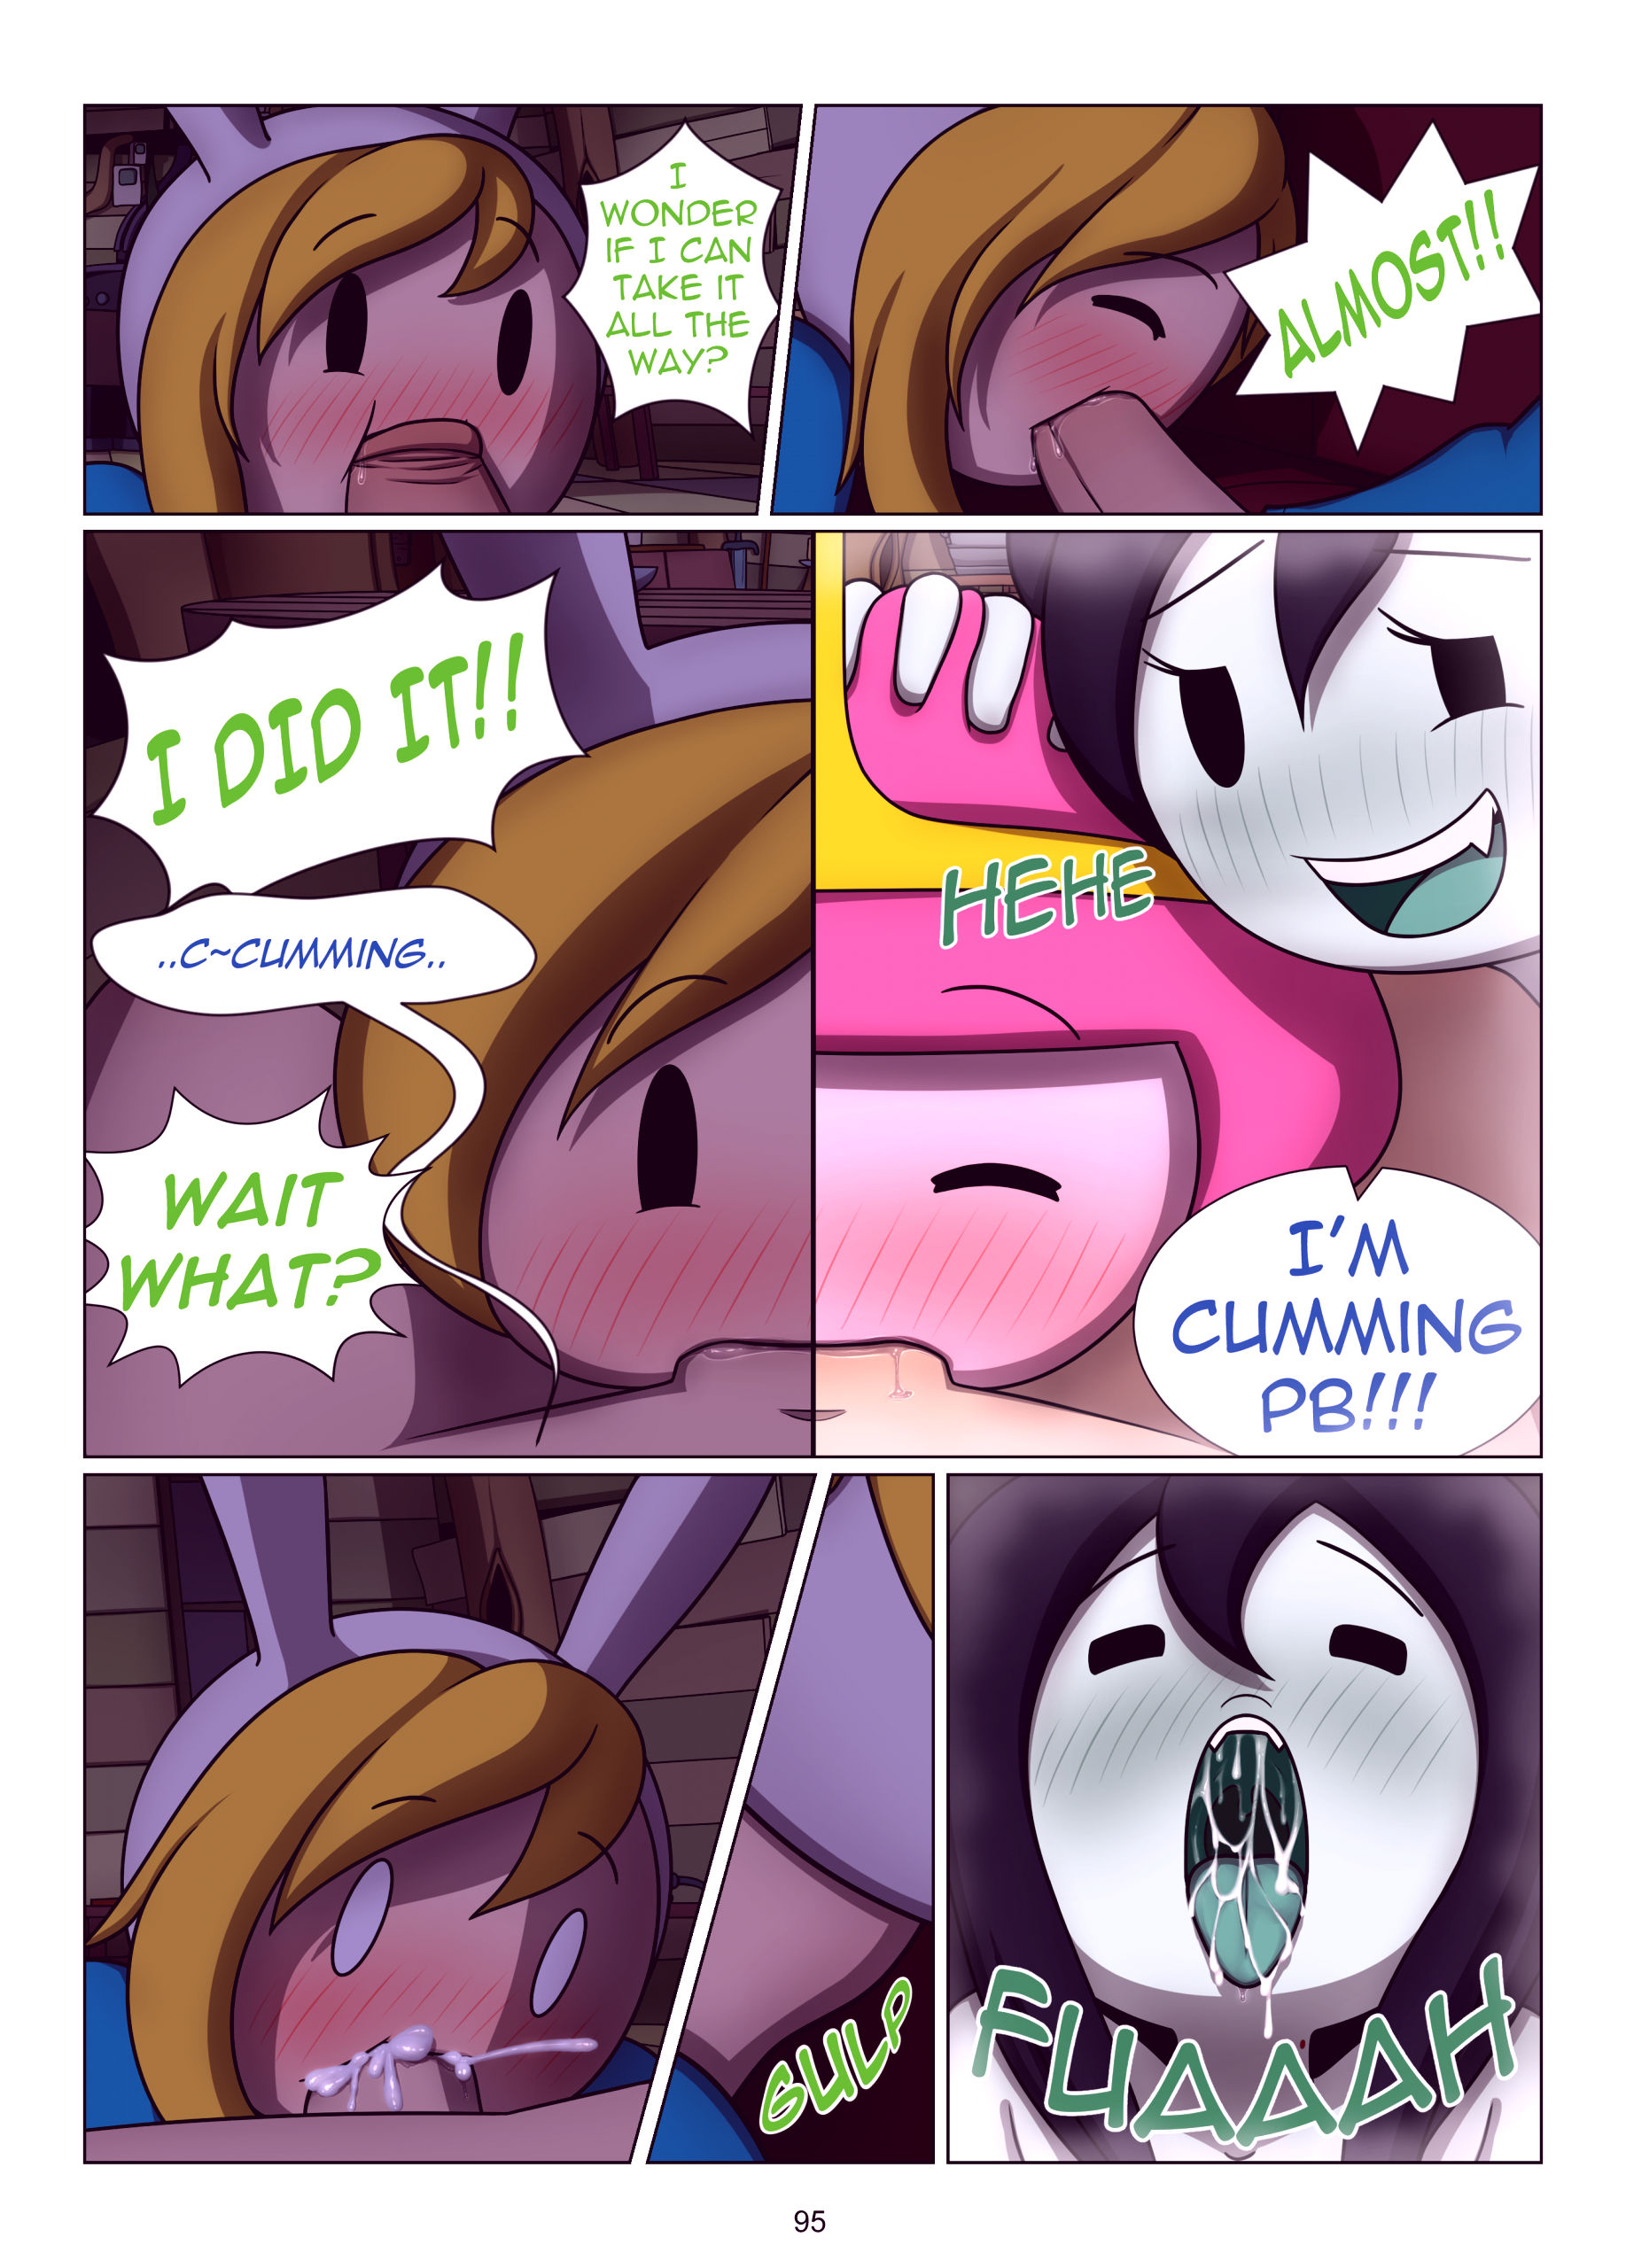 Misadventure time the collection porn comic picture 96